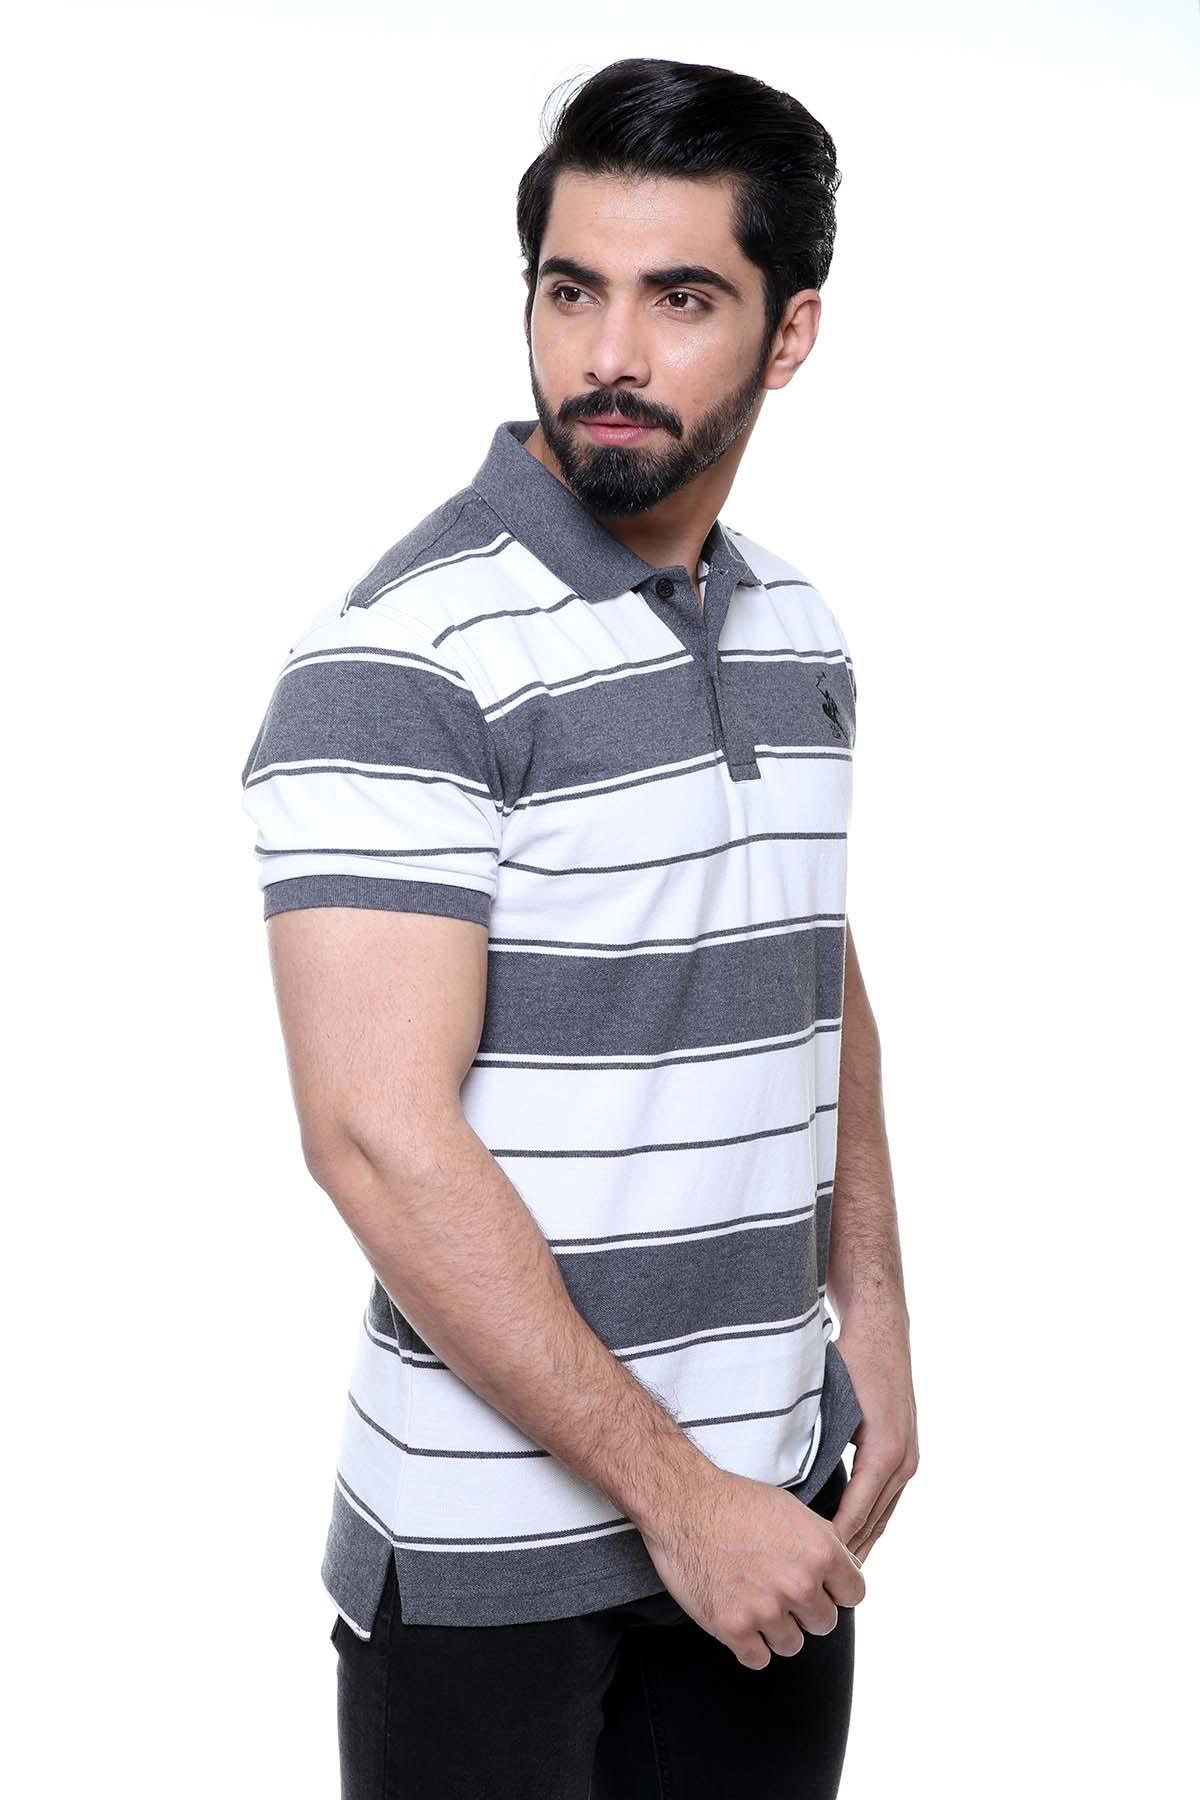 T SHIRT POLO WHITE CHARCOAL at Charcoal Clothing